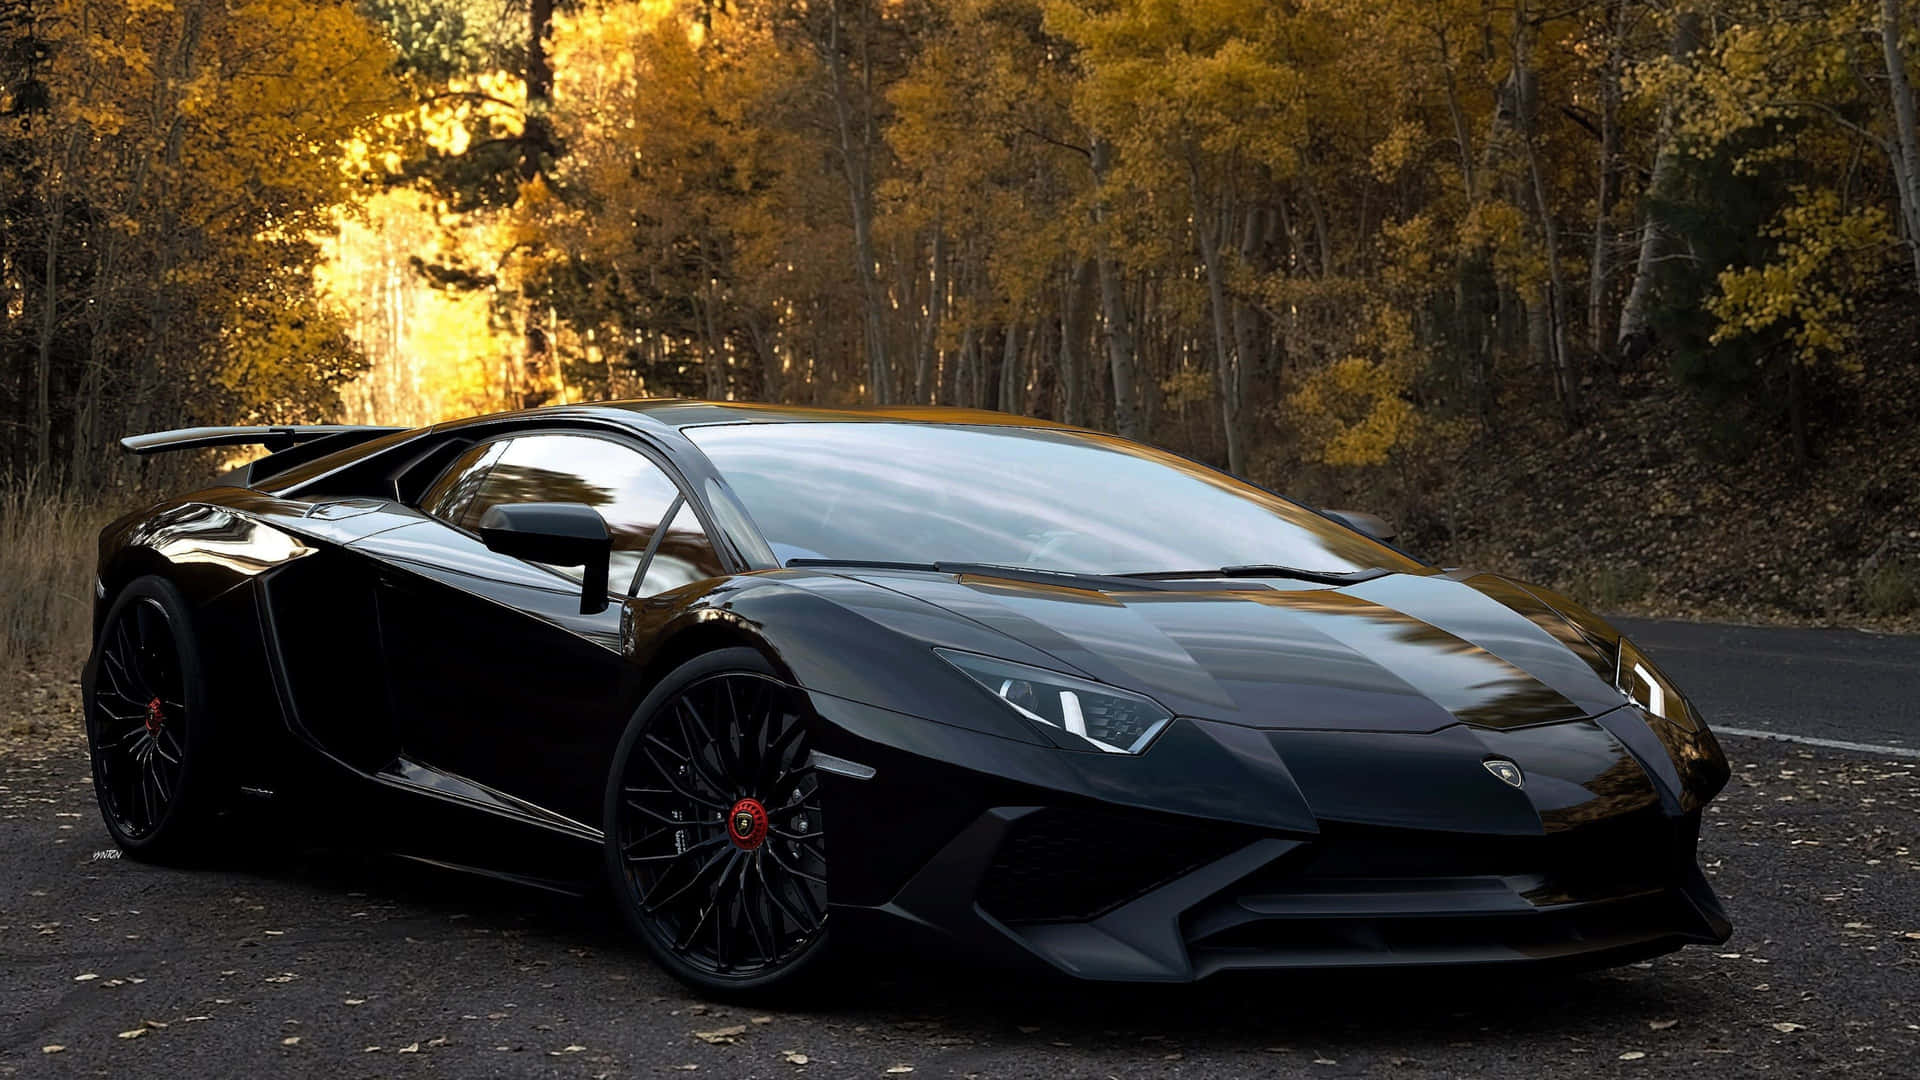 "Experience Luxury&Performance at its Finest with this 4K Lamborghini"